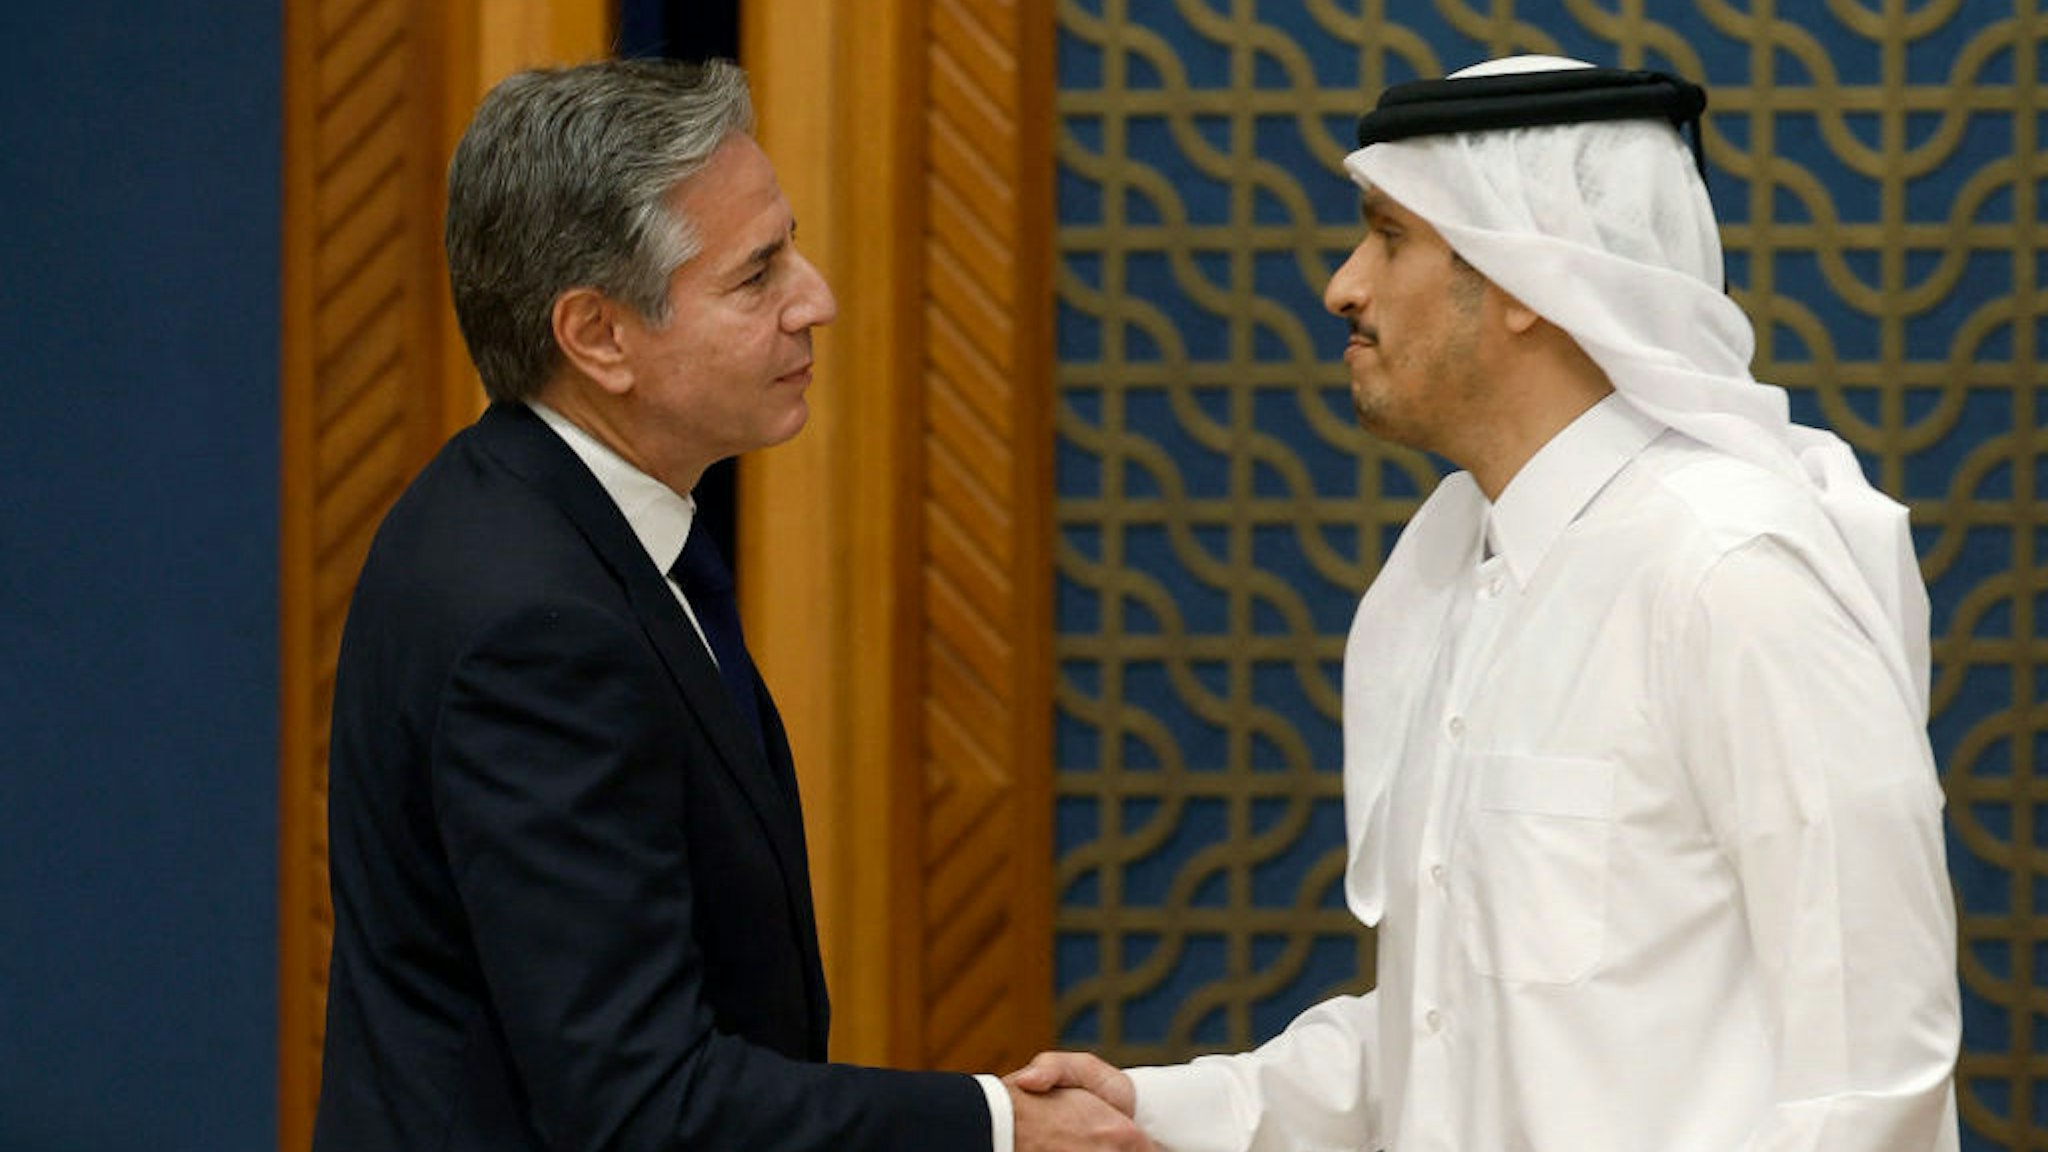 US Secretary of State Antony Blinken (L) shakes hands with Qatar's Prime Minister and Foreign Minister Mohammed bin Abdulrahman Al Thani following their meeting and press conference in Doha on October 13, 2023. US Secretary of State Antony Blinken on October 13, 2023, began a tour of six Arab capitals to build pressure on Hamas while Israel readies a massive offensive on the Gaza Strip following the militants' attacks. (Photo by KARIM JAAFAR / AFP) (Photo by KARIM JAAFAR/AFP via Getty Images)